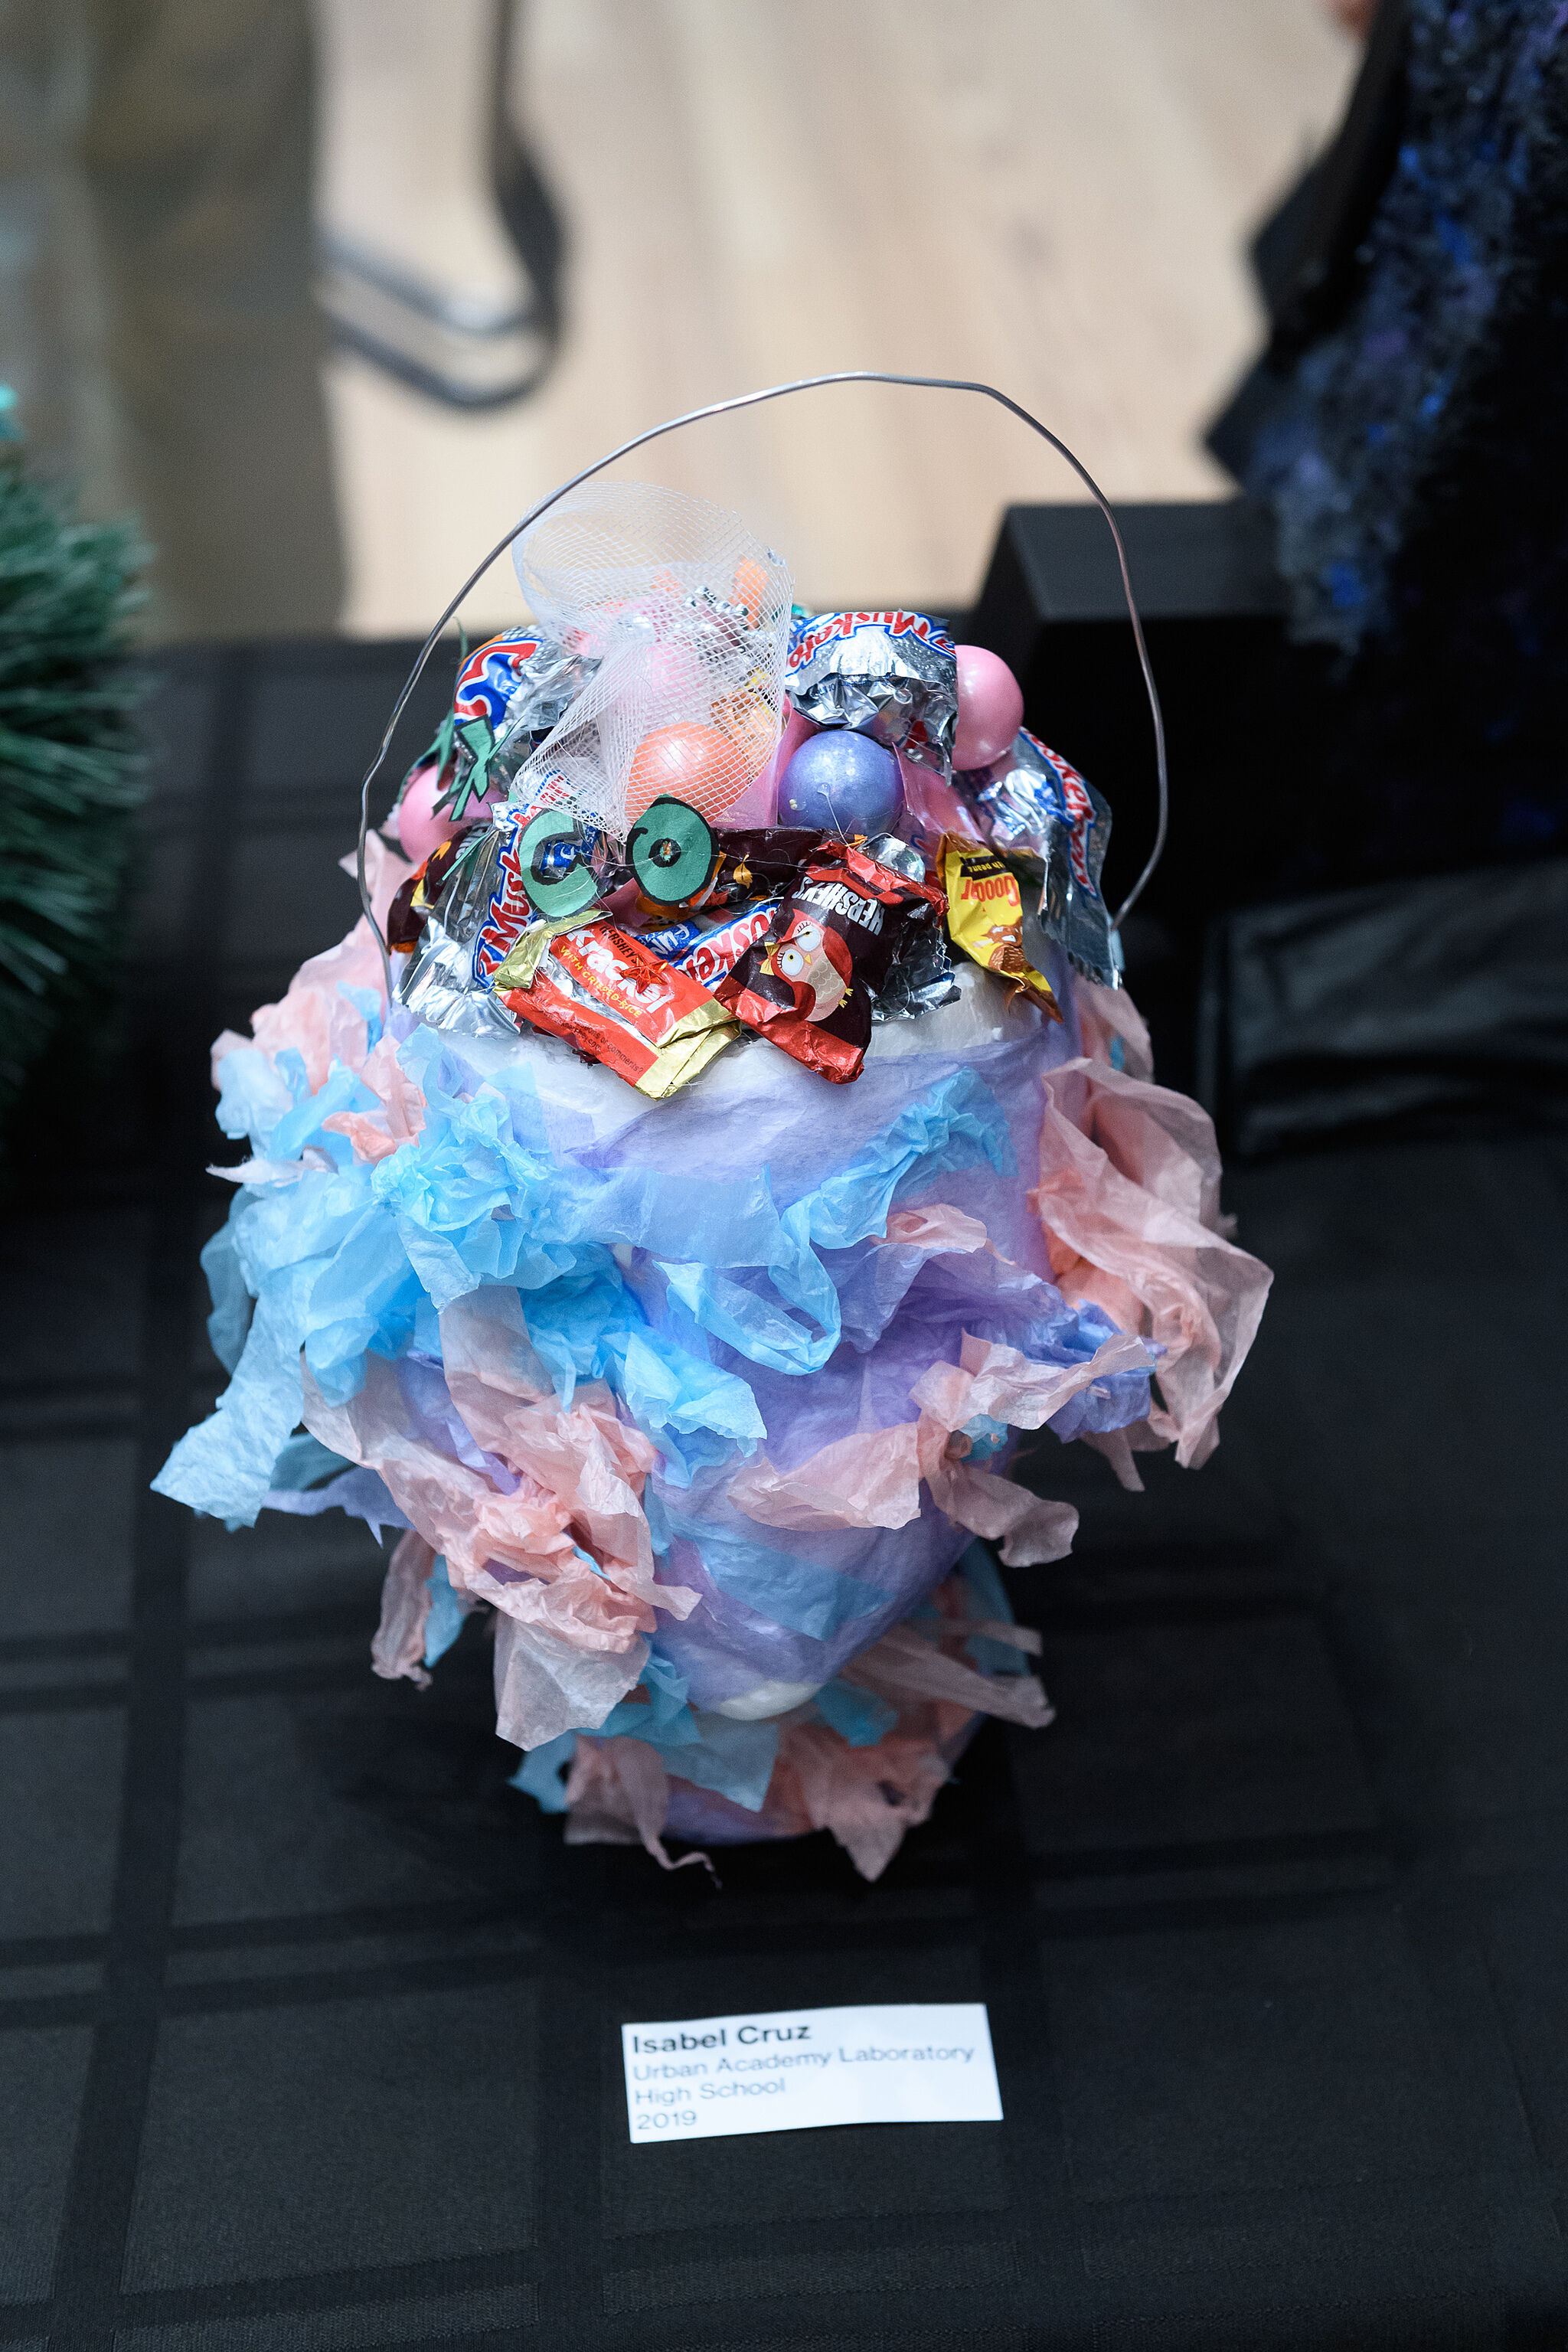 YI Artist, Isabel, displays her sculpture of a bucket wrapped in tissue paper and filled with candy wrappers, spring 2019